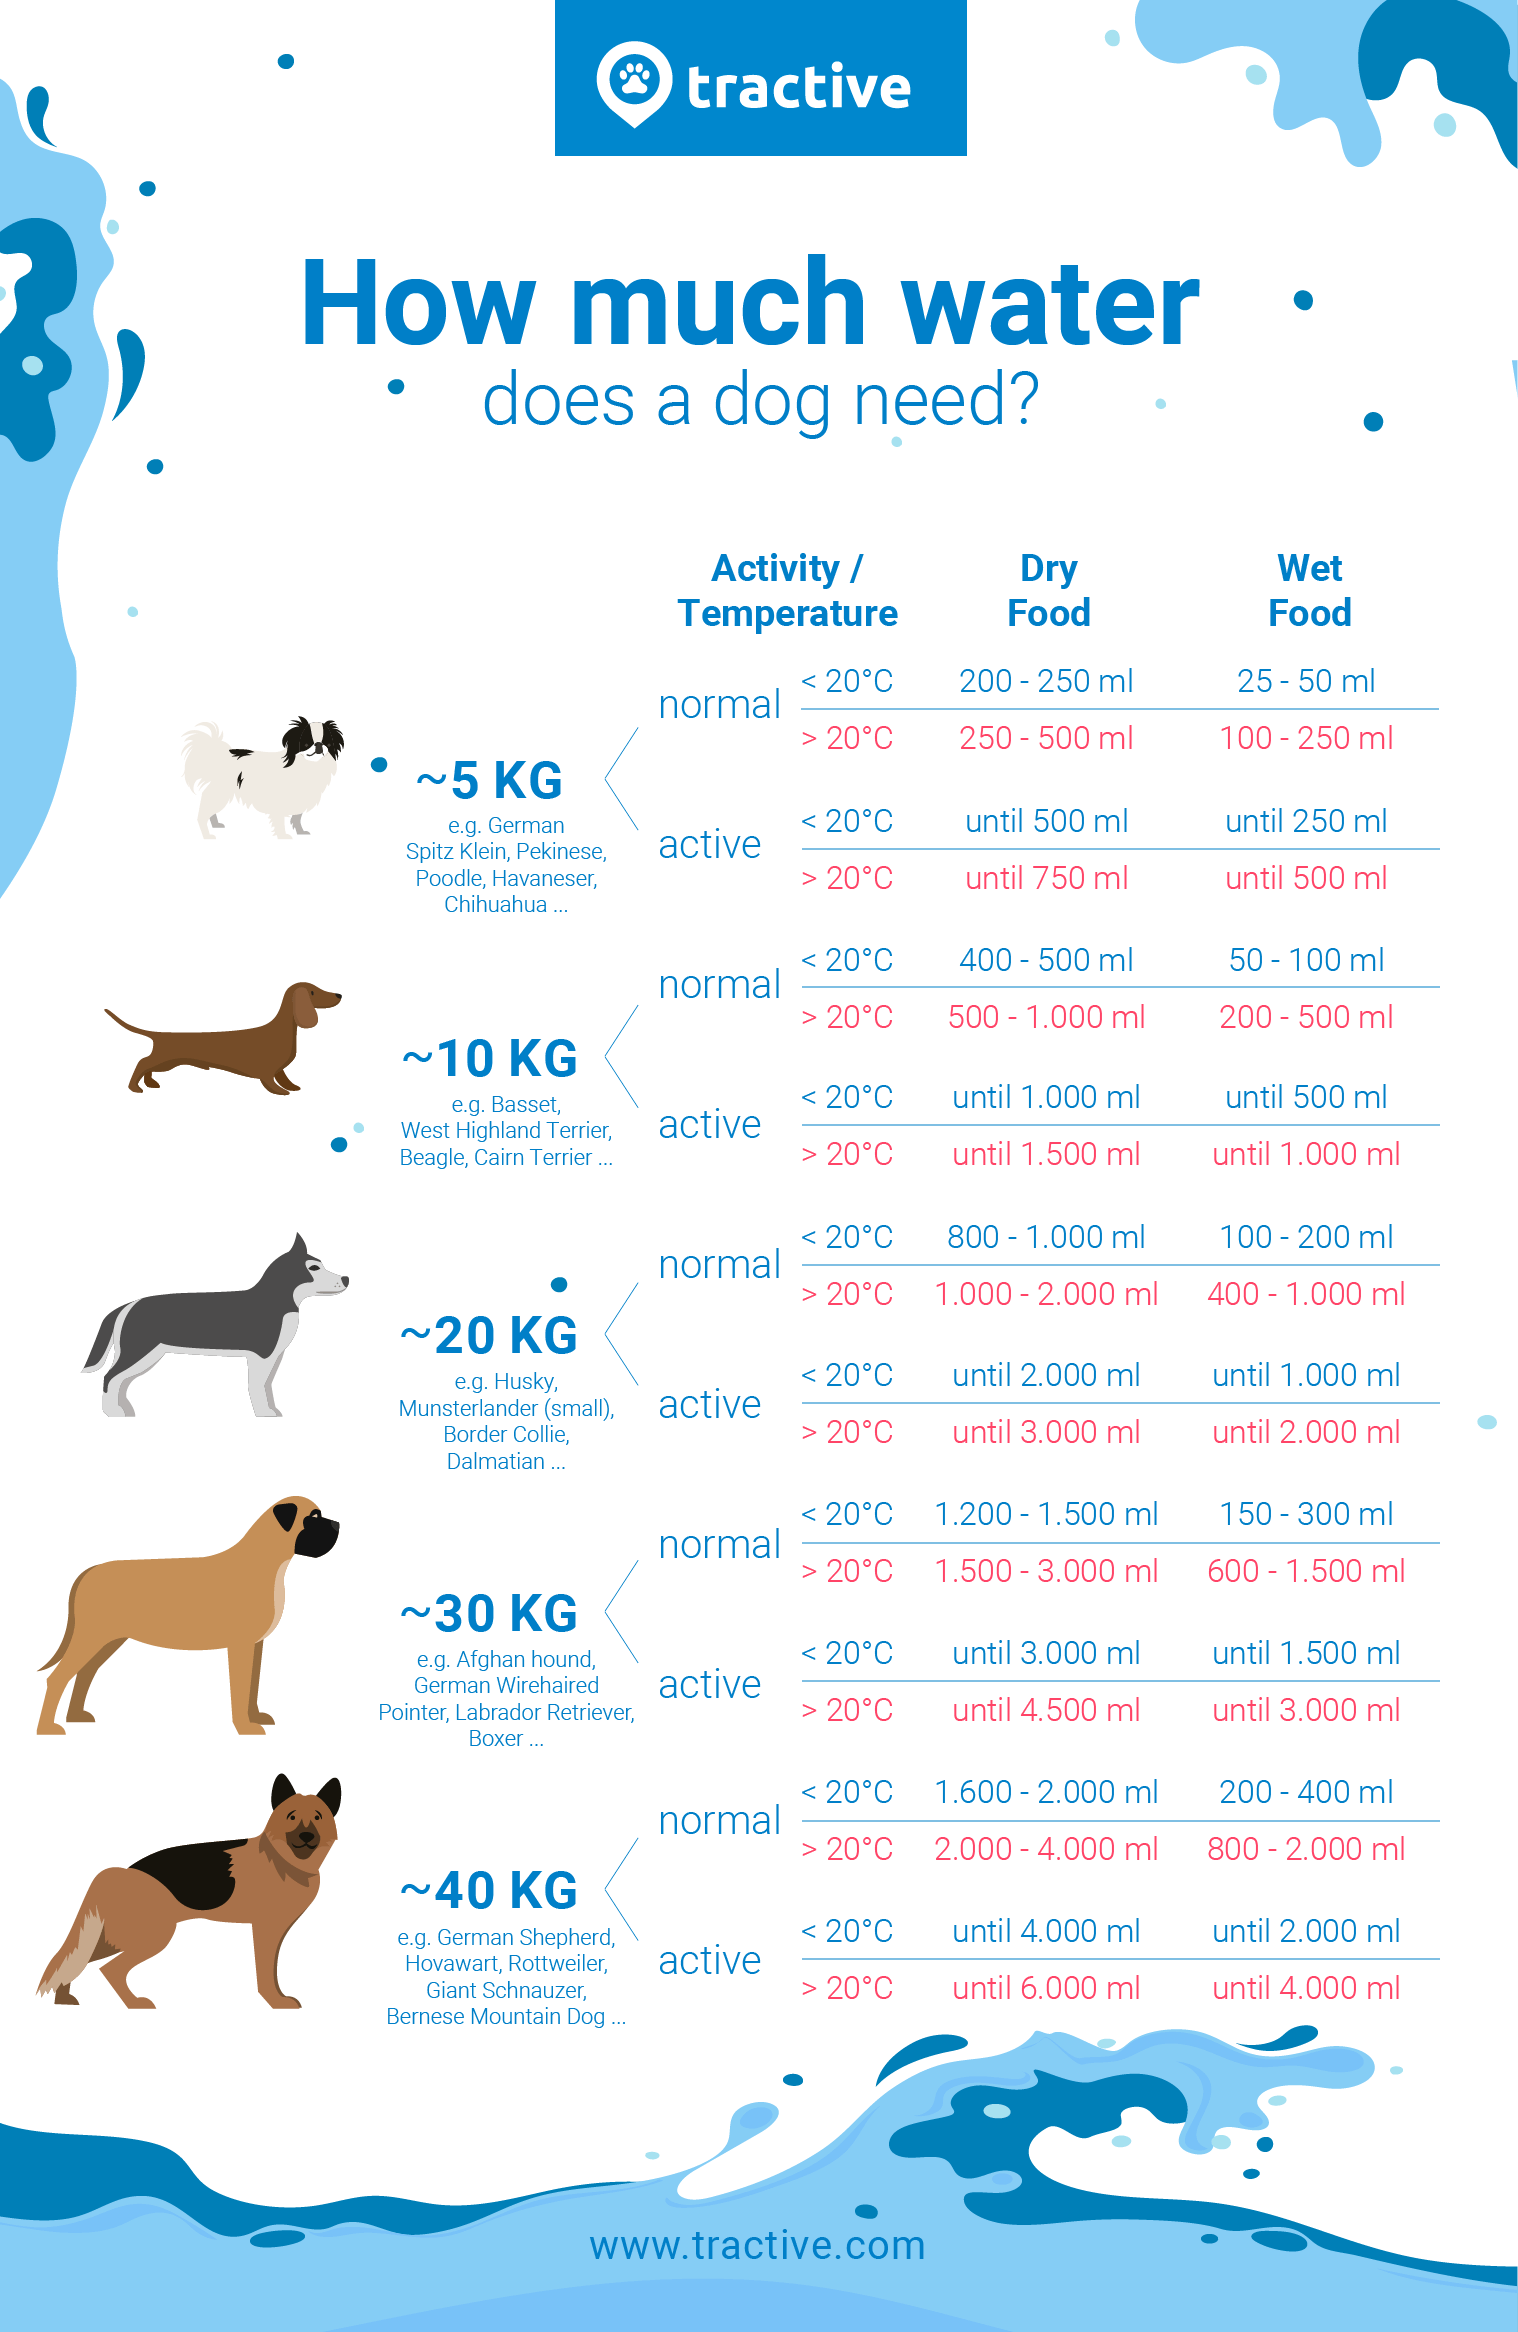 How much water should a dog drink in 24 hours?